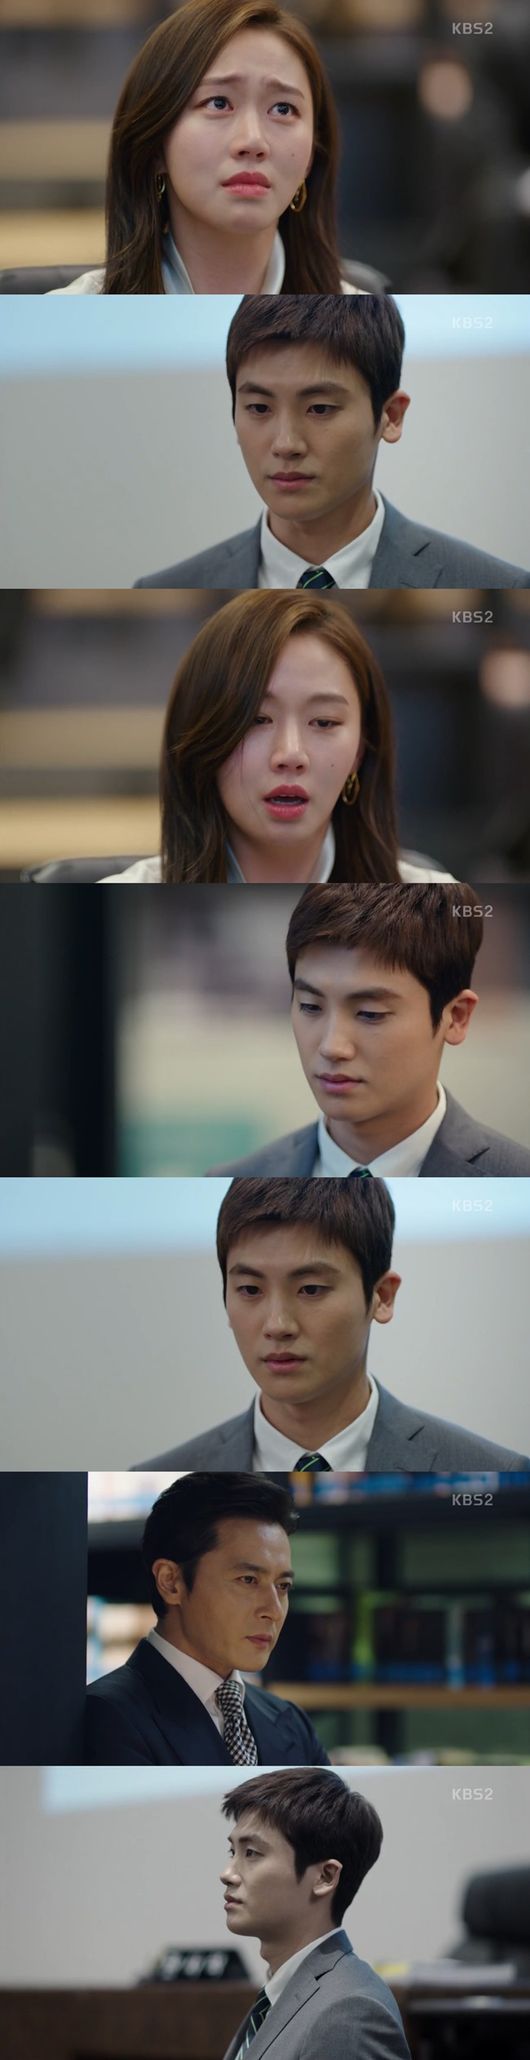 The relationship between Suits Park Hyung-sik and Ko Sung-hee has changed rapidly.Park Hyung-sik waived his victory in mock court in the mind of thinking Ko Sung-hee.In the 6th KBS 2TV tree drama Suits (played by Kim Jung-min and directed by Kim Jin-woo), which was broadcast on the afternoon of the 10th, the performances of Ko Yeon-woo (Park Hyung-sik) and Miniforce Seok (played by Jang Dong-gun) were drawn.Ko Yeon-woo played a combination with Miniforce while preparing for a mock court.In the mock court, Ko had a confrontation with Seo Ki-woong (Lee Tae-sun).Ji-na Kim (Ko Sung-hee) counterattacked Seo Ki-woongs attitude, which seemed to ignore him, in the situation of Seo Ki-woong.Ko Yeon-woo claimed a counterclaim and turned it over into a infringement of human rights. Kang Ha-yeon (Jin Hee-kyung) noticed Ko Yeon-woo.Ko was troubled by the fact that he was not a real lawyer. Miniforce knew the truth, but his hard feelings remained.Im not a real lawyer, Ko told Se-hee (Lee Si-won), who calls himself a high lawyer.Miniforce wanted Ko to do well in the mock courtroom, and Miniforce wanted Ko to find a way to solve it himself.He told Ko to stop talking about the mock court, but he could not care at all.Ko Yeon-woo also learned to work with the mock court to help Miniforces lawsuit.Miniforce had made an effort to file a lawsuit against a pharmaceutical company, and Ko Yeon-u seemed to offer a clue.However, the Client has no choice but to continue the trial without disclosing everything to Miniforce.But the Miniforce seat was neatly solved.Miniforce was assisted by Kang Ha-yeon and was able to agree with Victims, who sued the drug company, and David Kim (Son Seok-gu).Miniforce and Ko Yeon-woo were also worried about the fact that The Client hid the fact that the pharmaceutical company Kim had Lou Gehrigs disease.Eventually, Miniforce and Ko Yeon-woo found out that the former director of The Client had been clinically manipulated.But I tried to help Kim. It was Kang Ha-yeons idea, and Ko Yeon-woo gave me the idea.Kim expressed his sincere apologies to Victims for taking the same medicine and recovering himself by revealing that he was also Lou Gehrigs disease.In the end, he continued to study and expressed his desire to make drugs without side effects: Ko Yeon-woo, Miniforce Seok, and Kang Ha-yeon.Ko Yeon-woo planned to set Se-hee up as Innocent Witness in the mock court, and Miniforce Seok cheered him up while telling Ko Yeon-woo not to bring up the mock court story.Ji-na Kim also looked to care about Se-hee who attended with Innocent Witness. Hong Da-ham (Chae Jung-an) also helped Ko Yeon-woo.The mock courtroom seemed to be a break between Ko Yeon-woo and Ji-na Kim.Sehee, who went to Innocent Witness on the side of Ko Yeon-woo, told the story of Ji-na Kims Rabbit. Ji-na Kim was on the day.Ji-na Kim revealed the uncomfortable feelings to Ko Yeon-woo, and Ko Yeon-woo also read the mind of Ji-na Kim.Apart from the mock court, the feelings of the two people were met, but Ko did not back down on Ji-na Kims wounds but pushed them more strongly.Ko Yeon-woo was saddened by Ji-na Kim, who was struggling with tears.In the end, Ko thought of Ji-na Kim rather than winning the mock courtroom; a change in their relationship was implied.KBS 2TV Broadcast Screen Capture